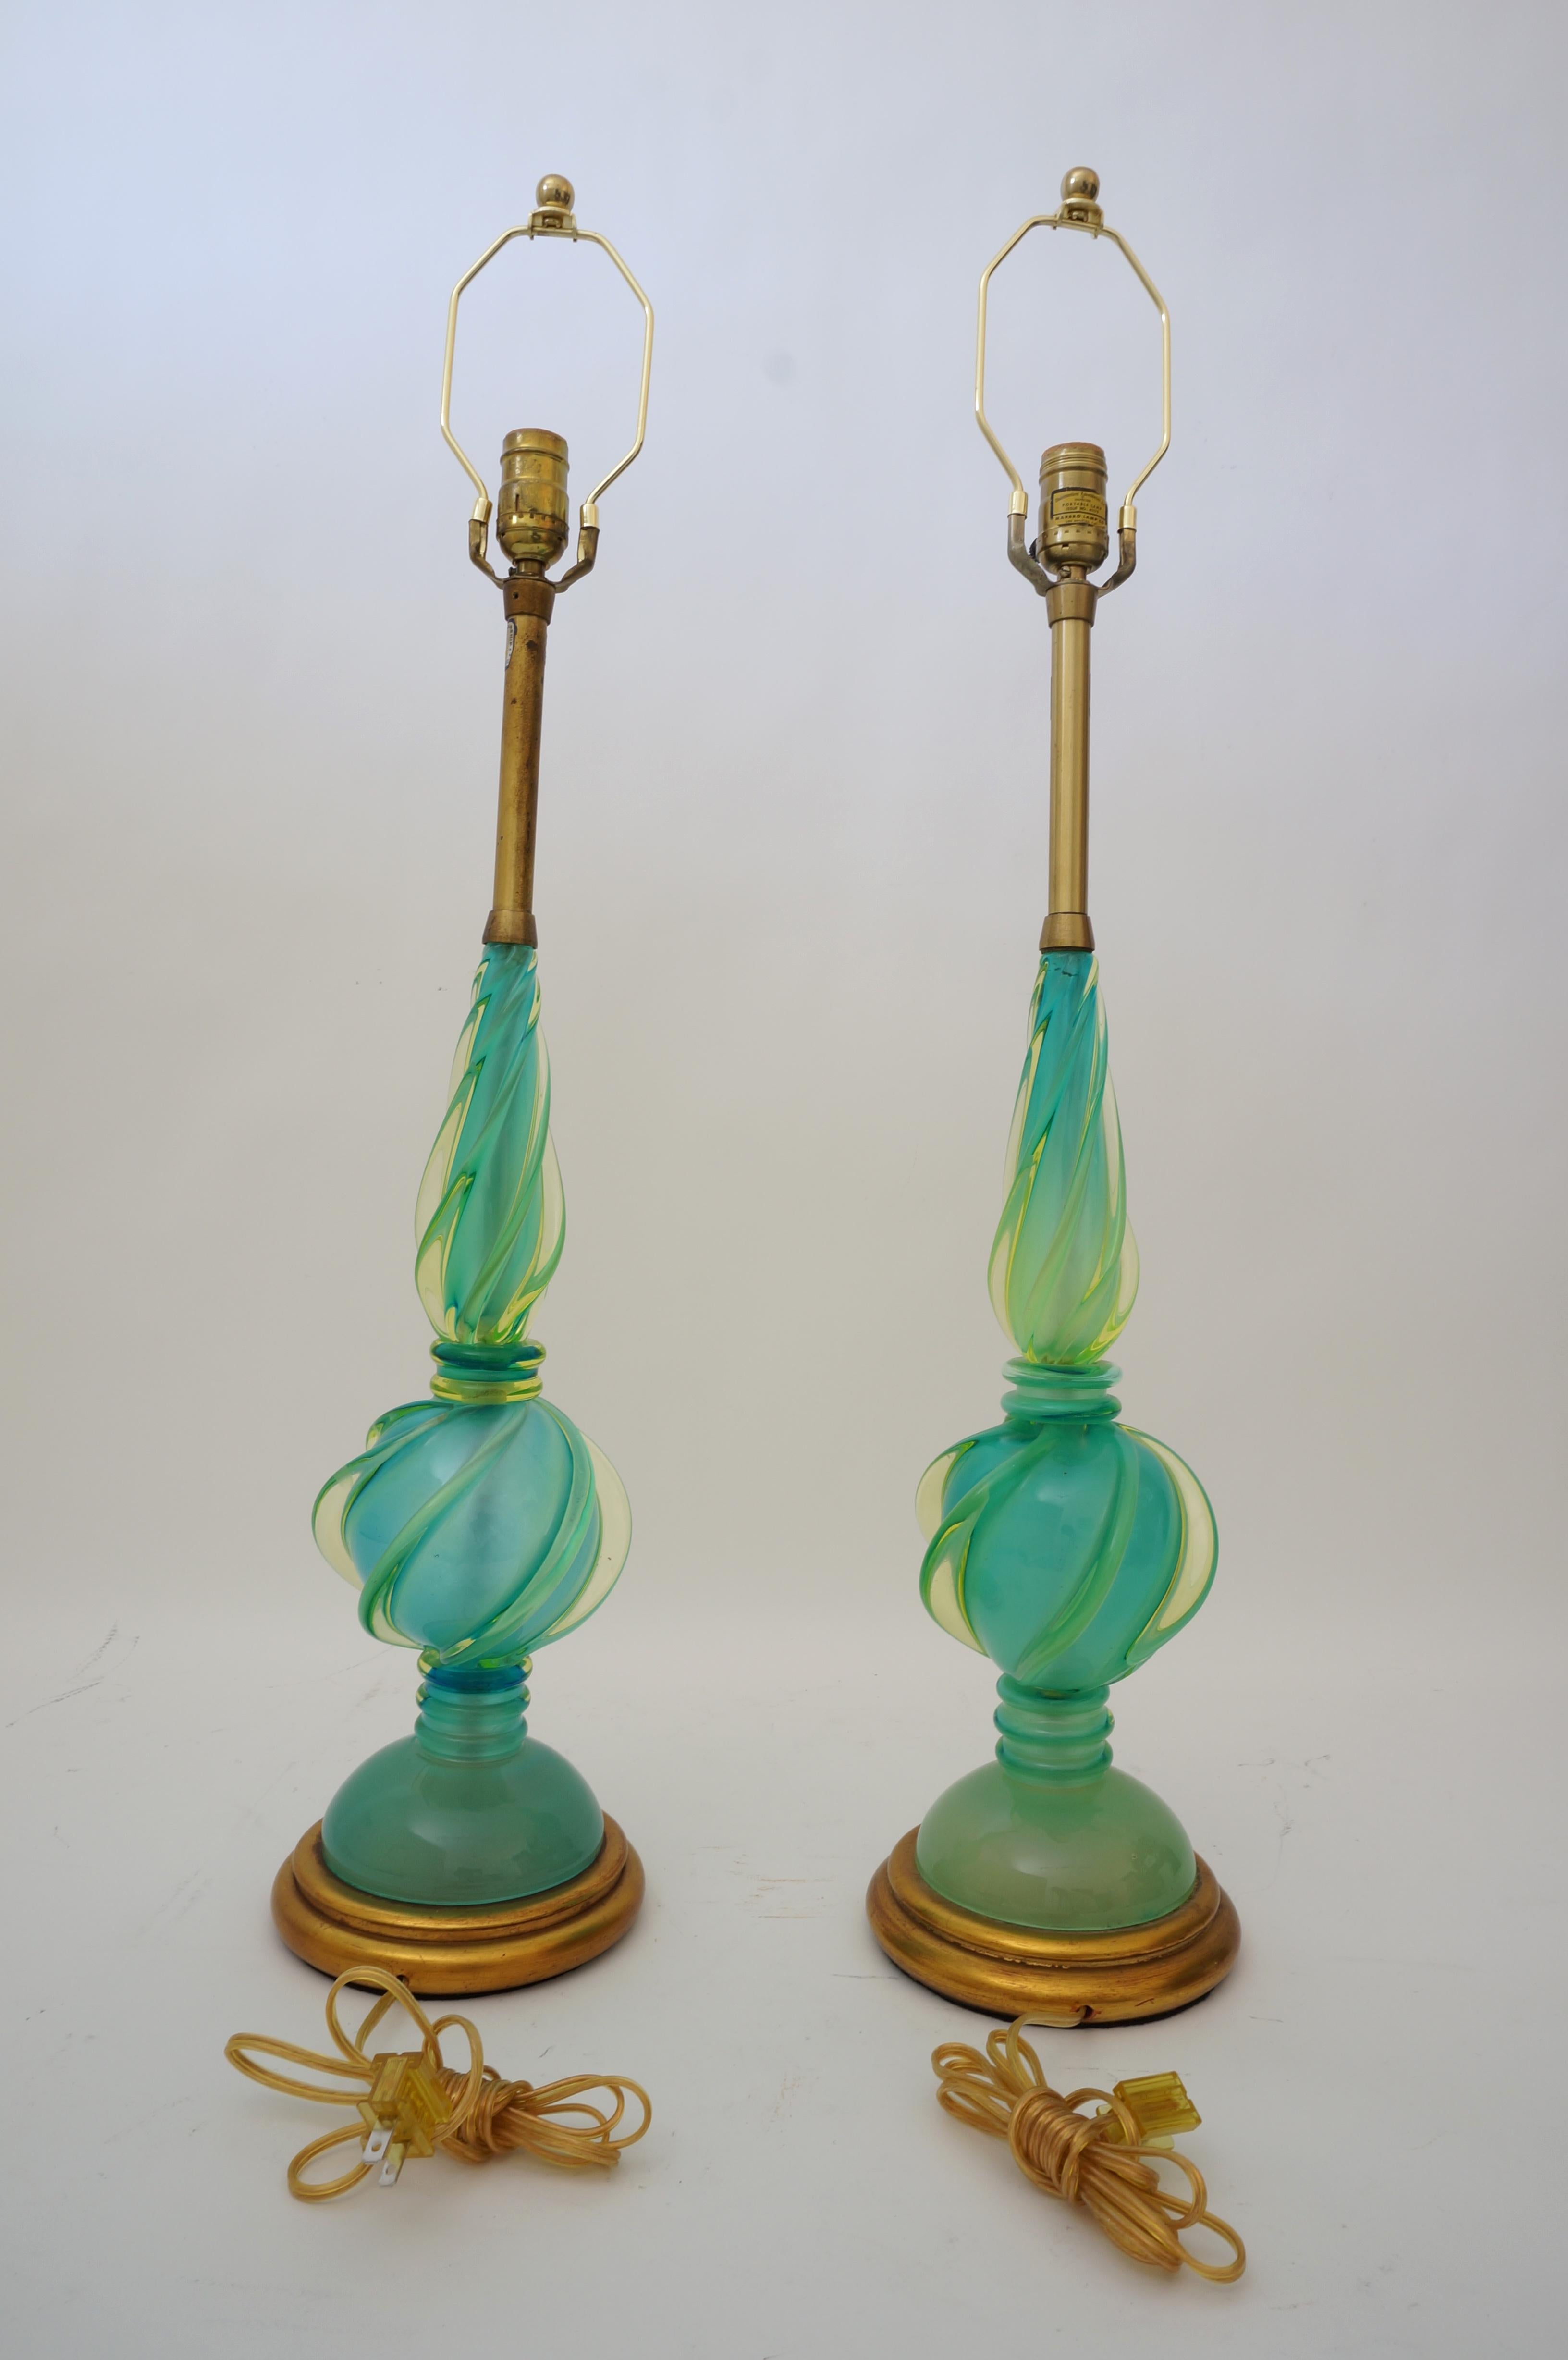 Hand-Crafted Pair of Marbro Seguso Murano Glass Lamps For Sale